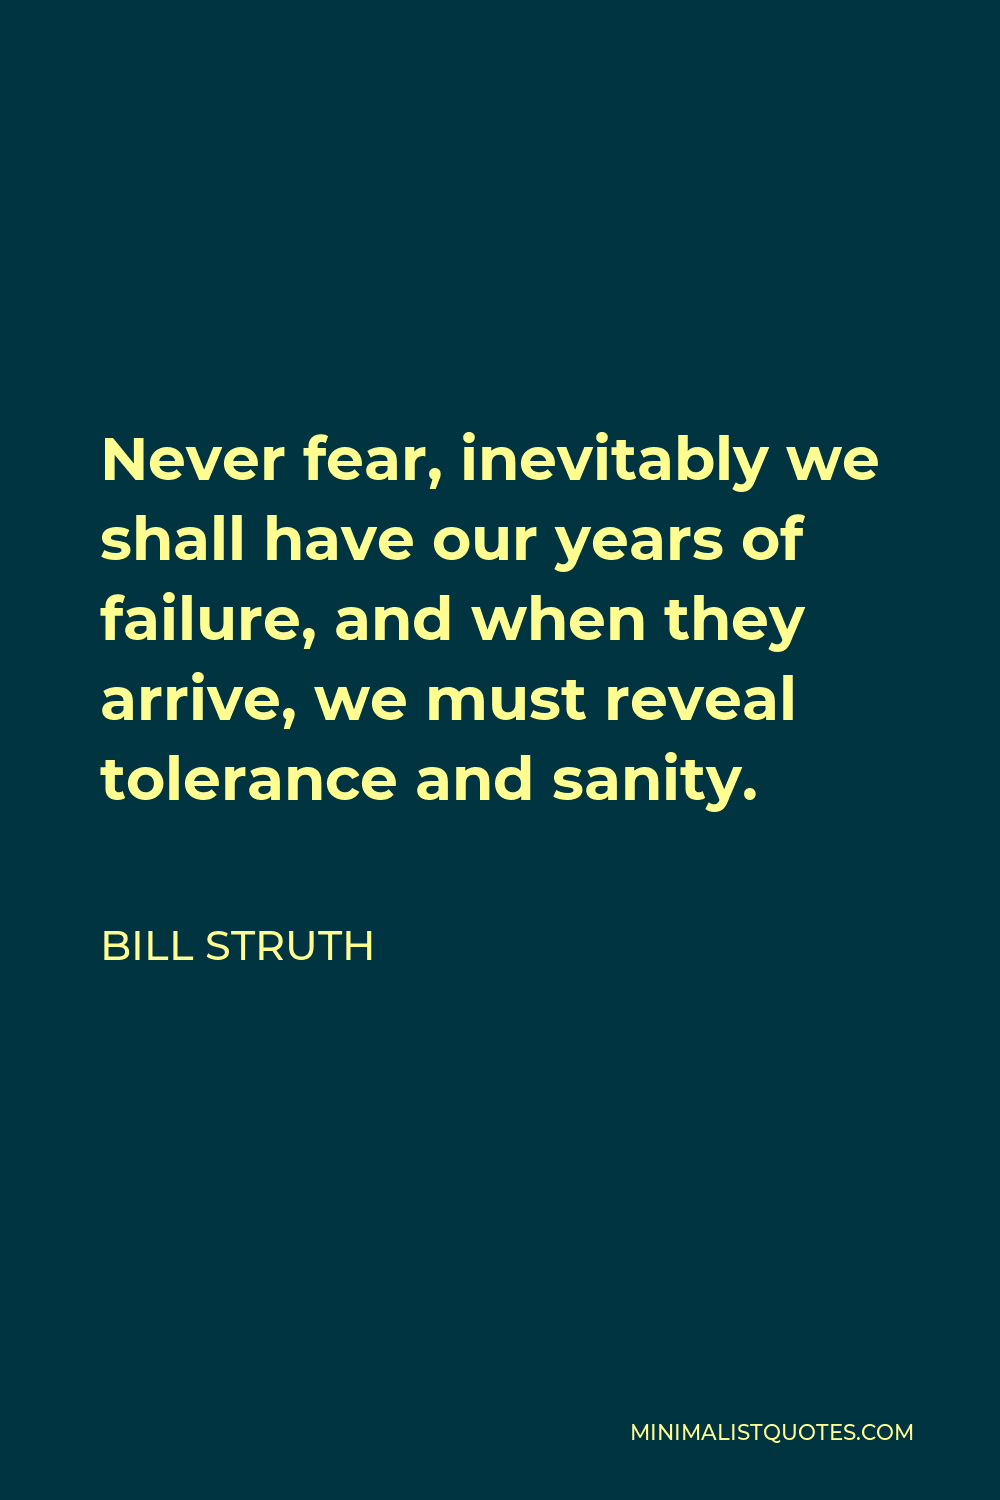 Bill Struth Quote - Never fear, inevitably we shall have our years of failure, and when they arrive, we must reveal tolerance and sanity.